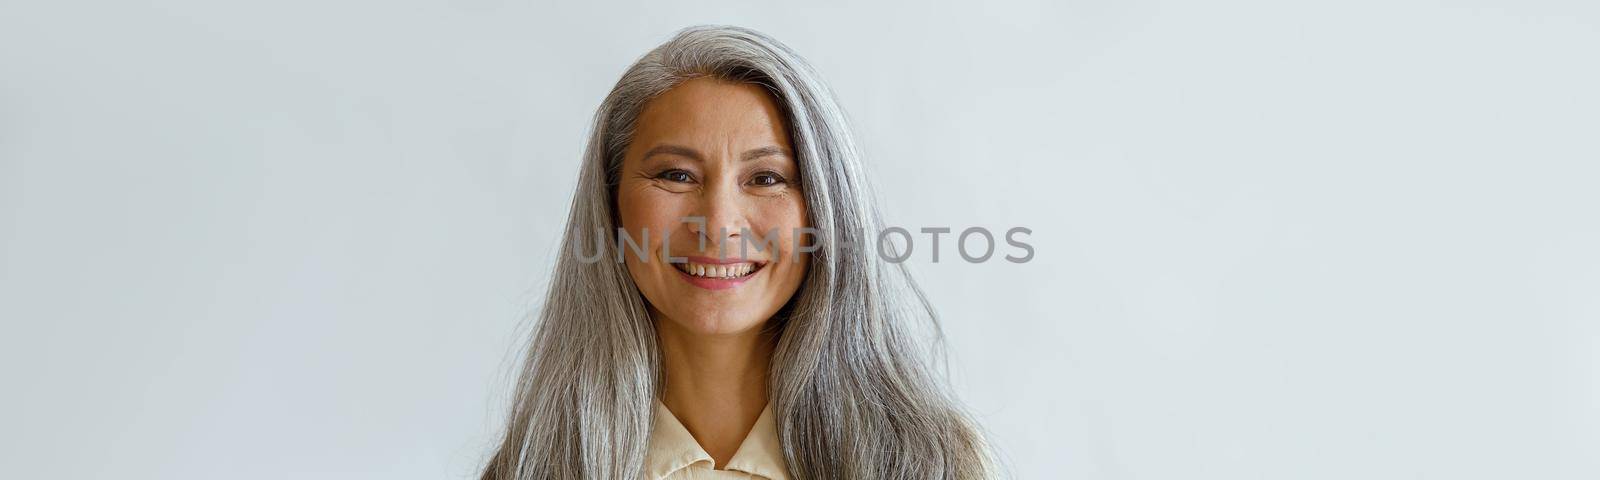 Portrait of smiling Asian woman with hoary hair and crossed arms on grey background by Yaroslav_astakhov